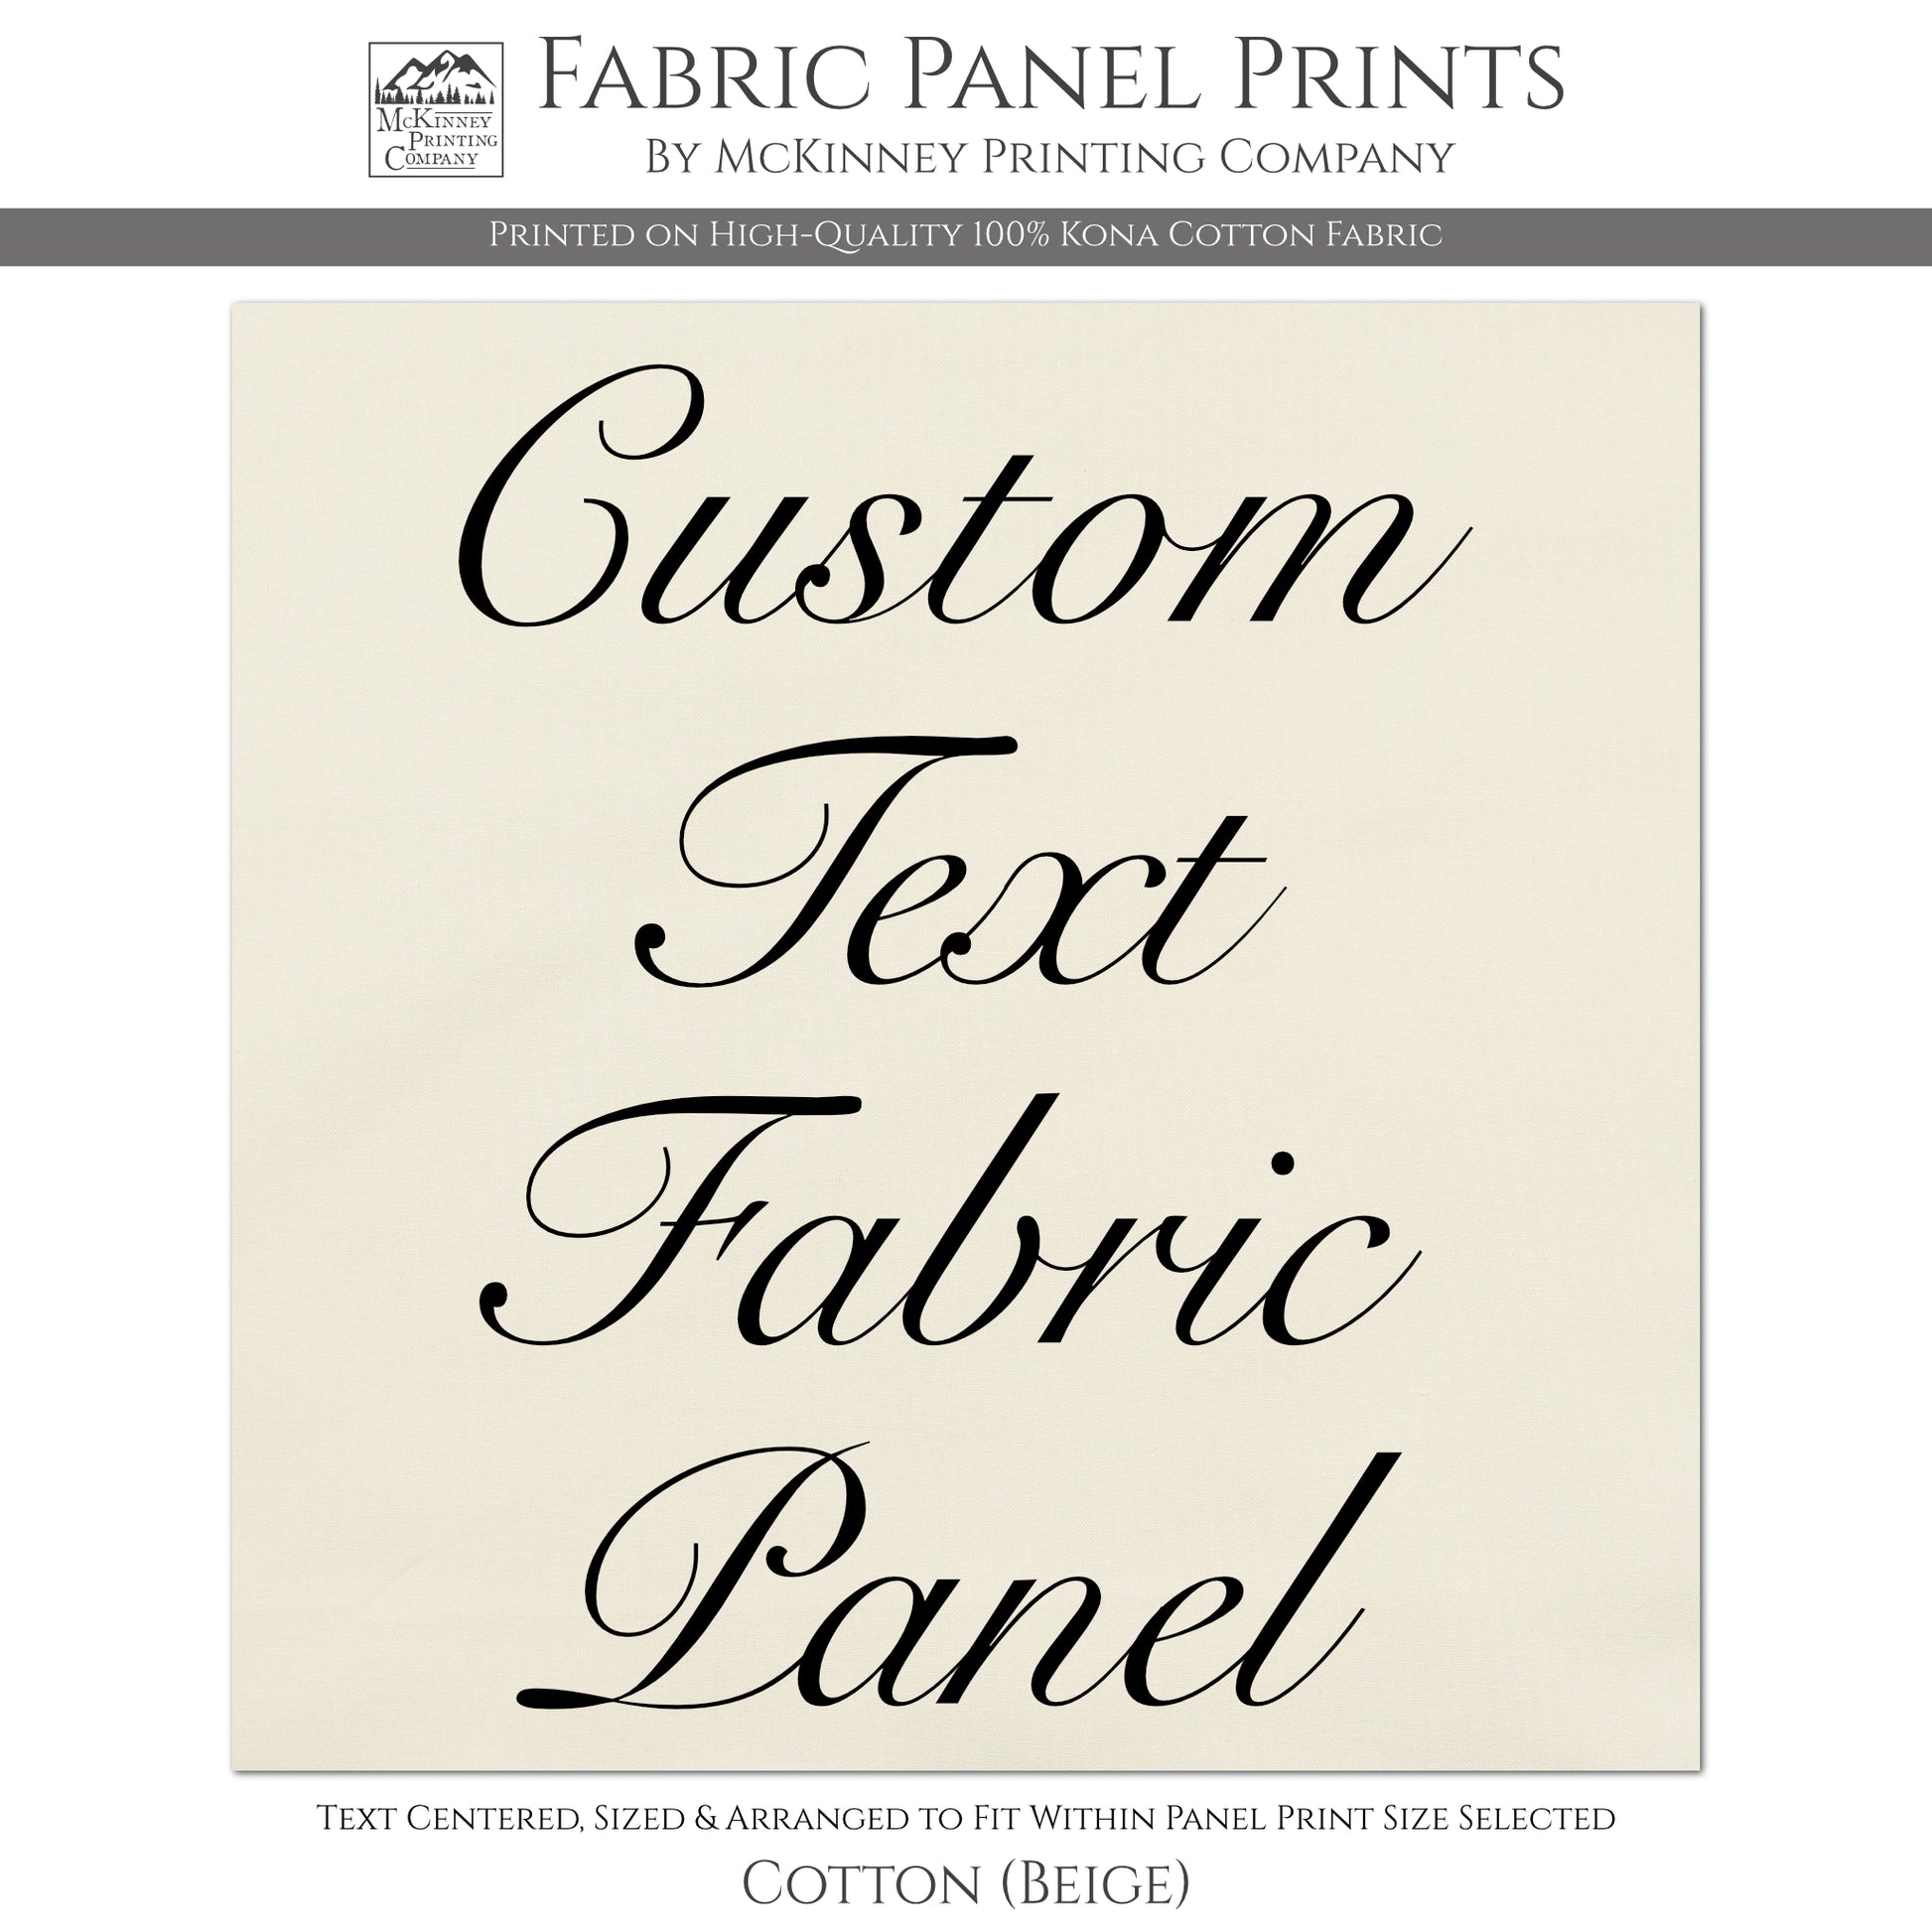 Quality Fabric Panels for Quilting